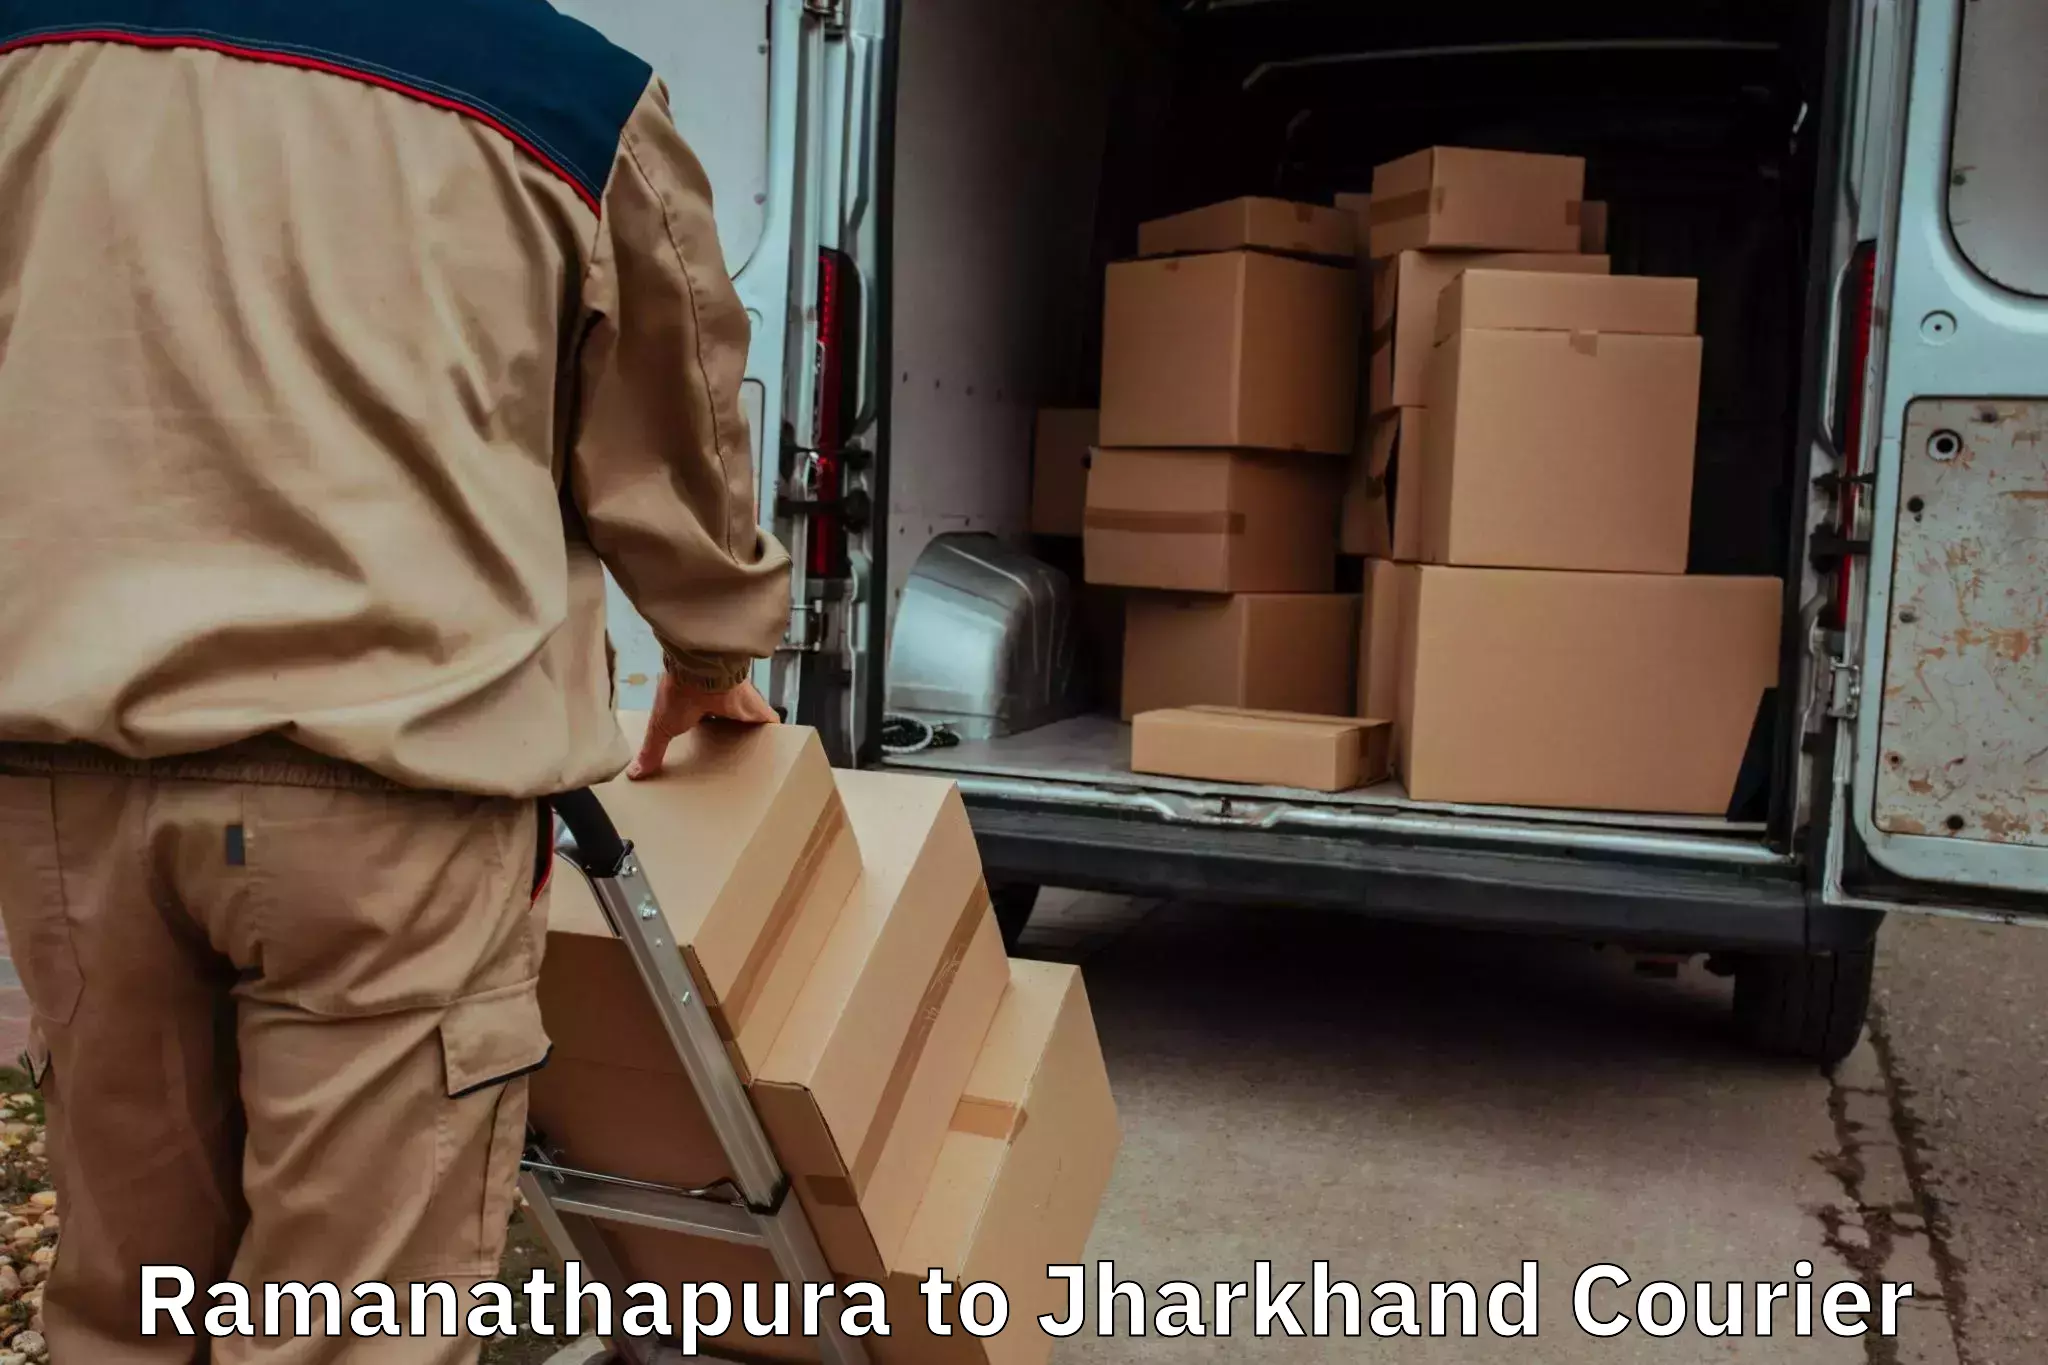 Professional moving assistance in Ramanathapura to Topchanchi